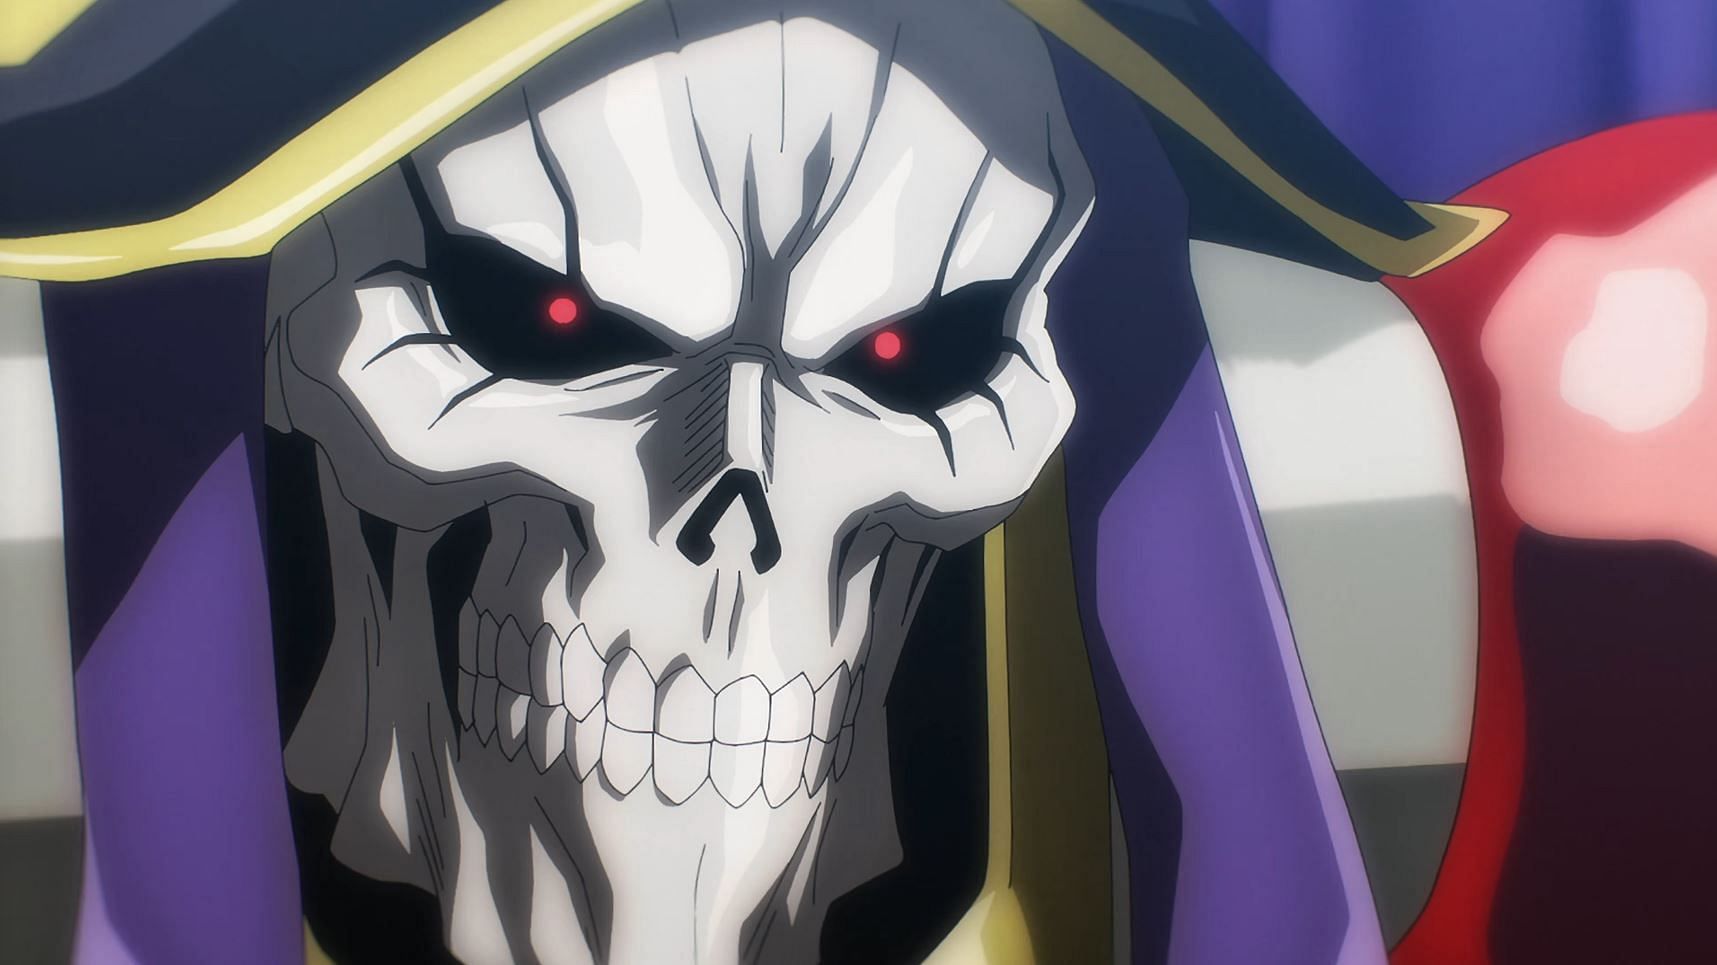 Overlord Season 4 Episode 10 Release Date & Time